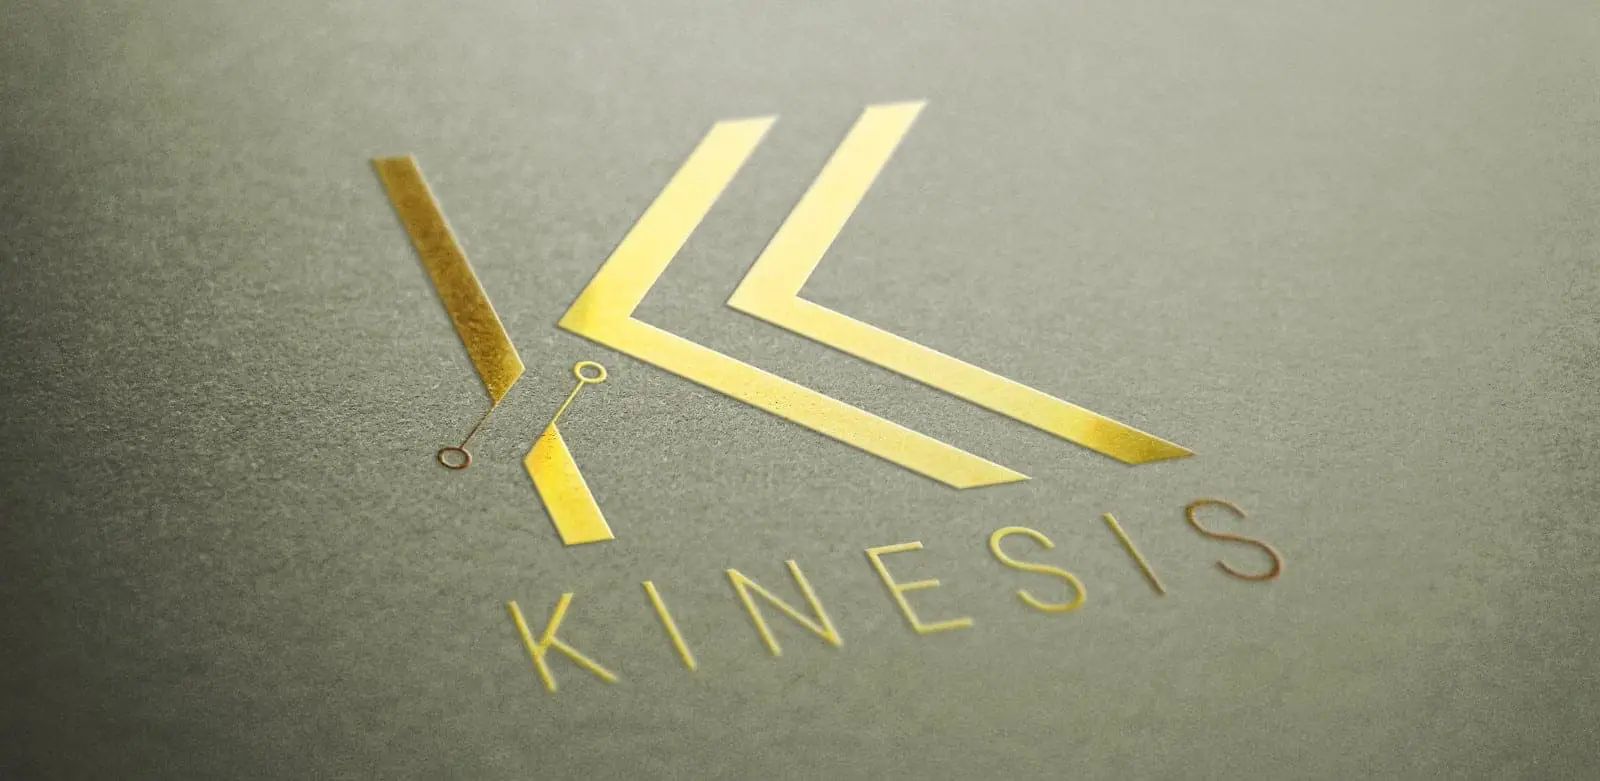 New Kinesis cryptocurrency system Can Now Be Used to Buy Tickets